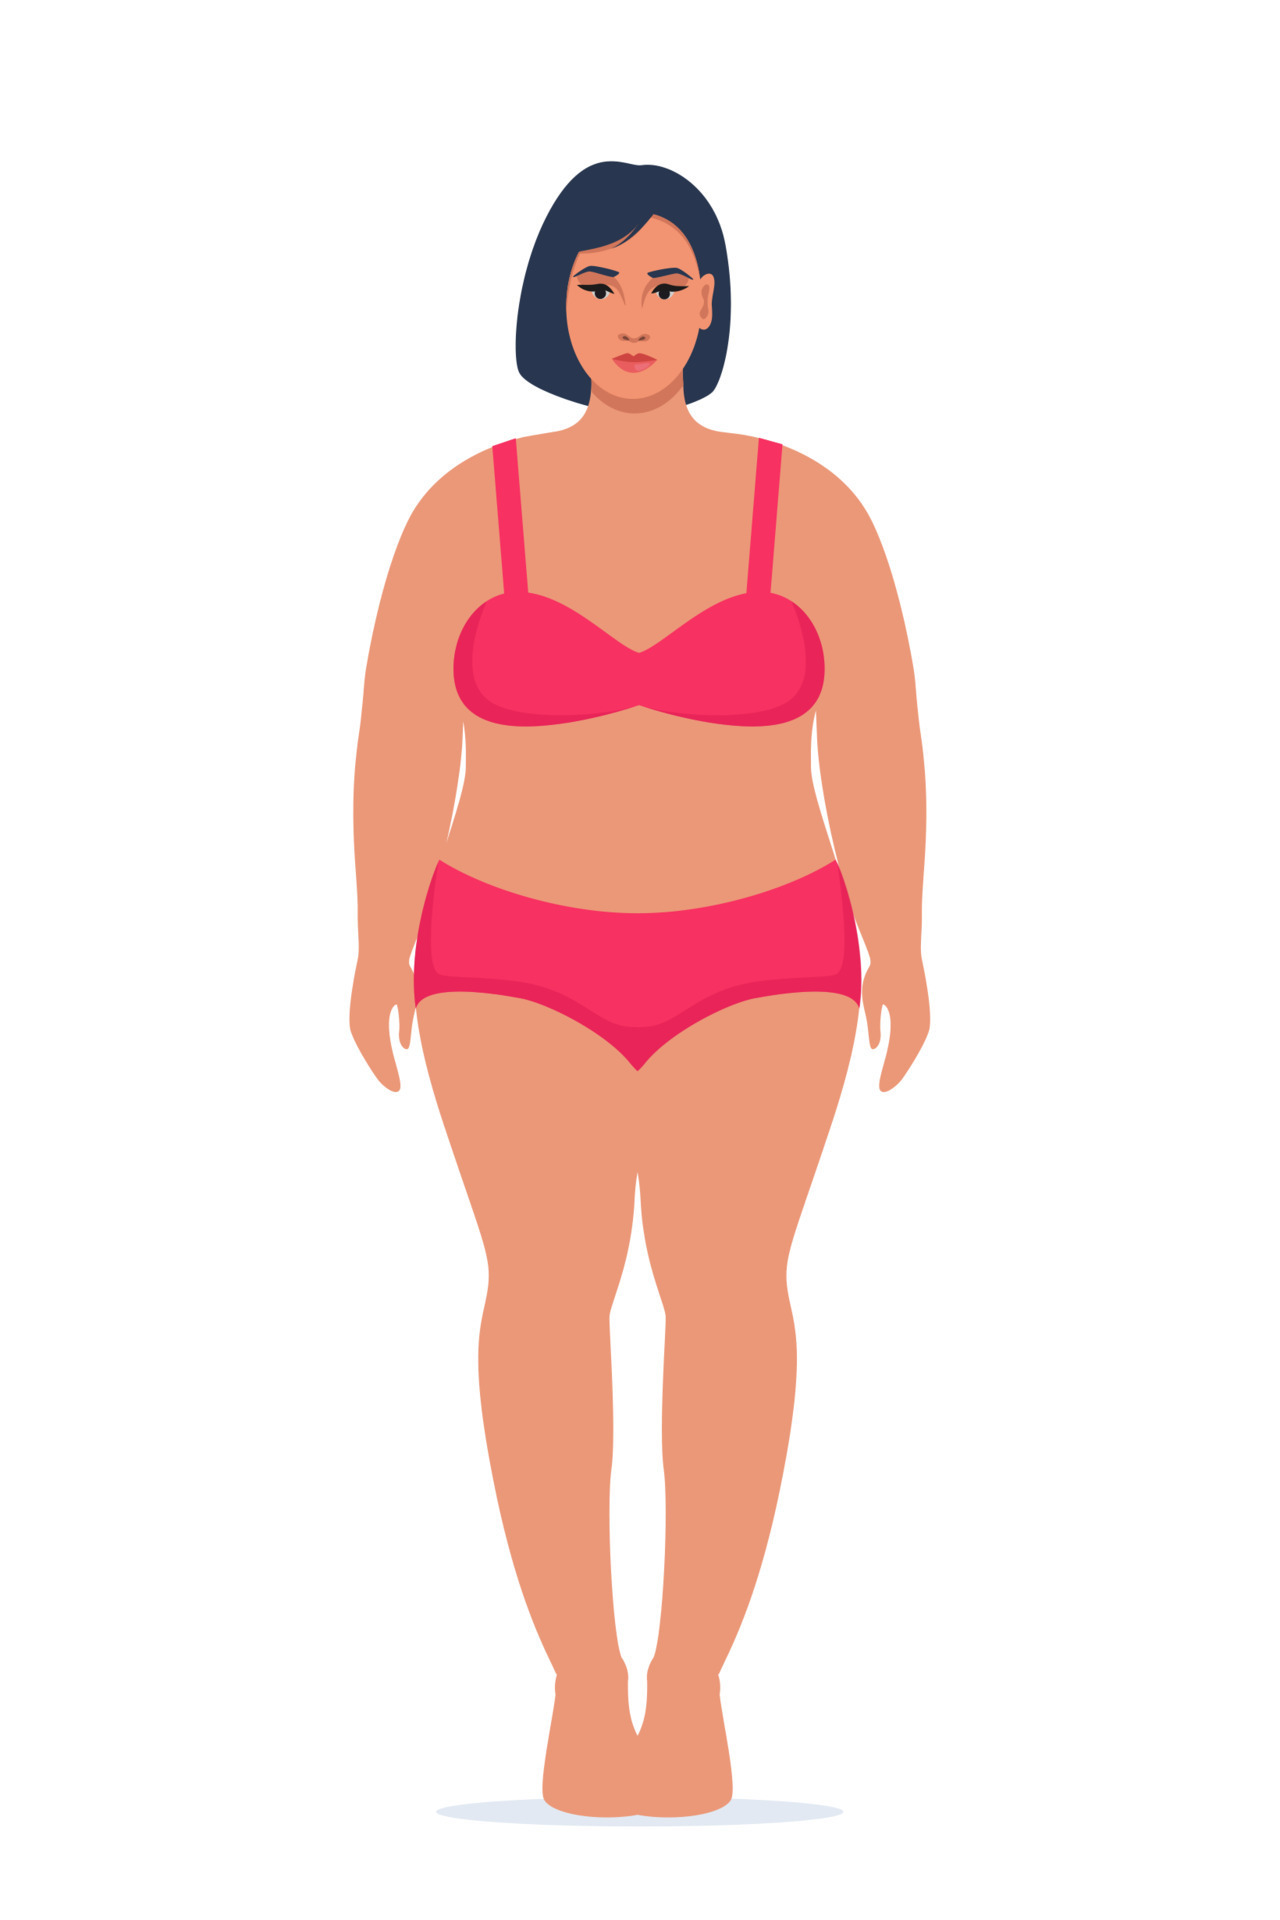 https://static.vecteezy.com/system/resources/previews/017/204/471/original/body-positive-woman-in-underwear-plus-size-female-character-attractive-curvy-overweight-girl-oversize-obesity-pretty-large-lady-in-beautiful-fashionable-clothes-illustration-vector.jpg